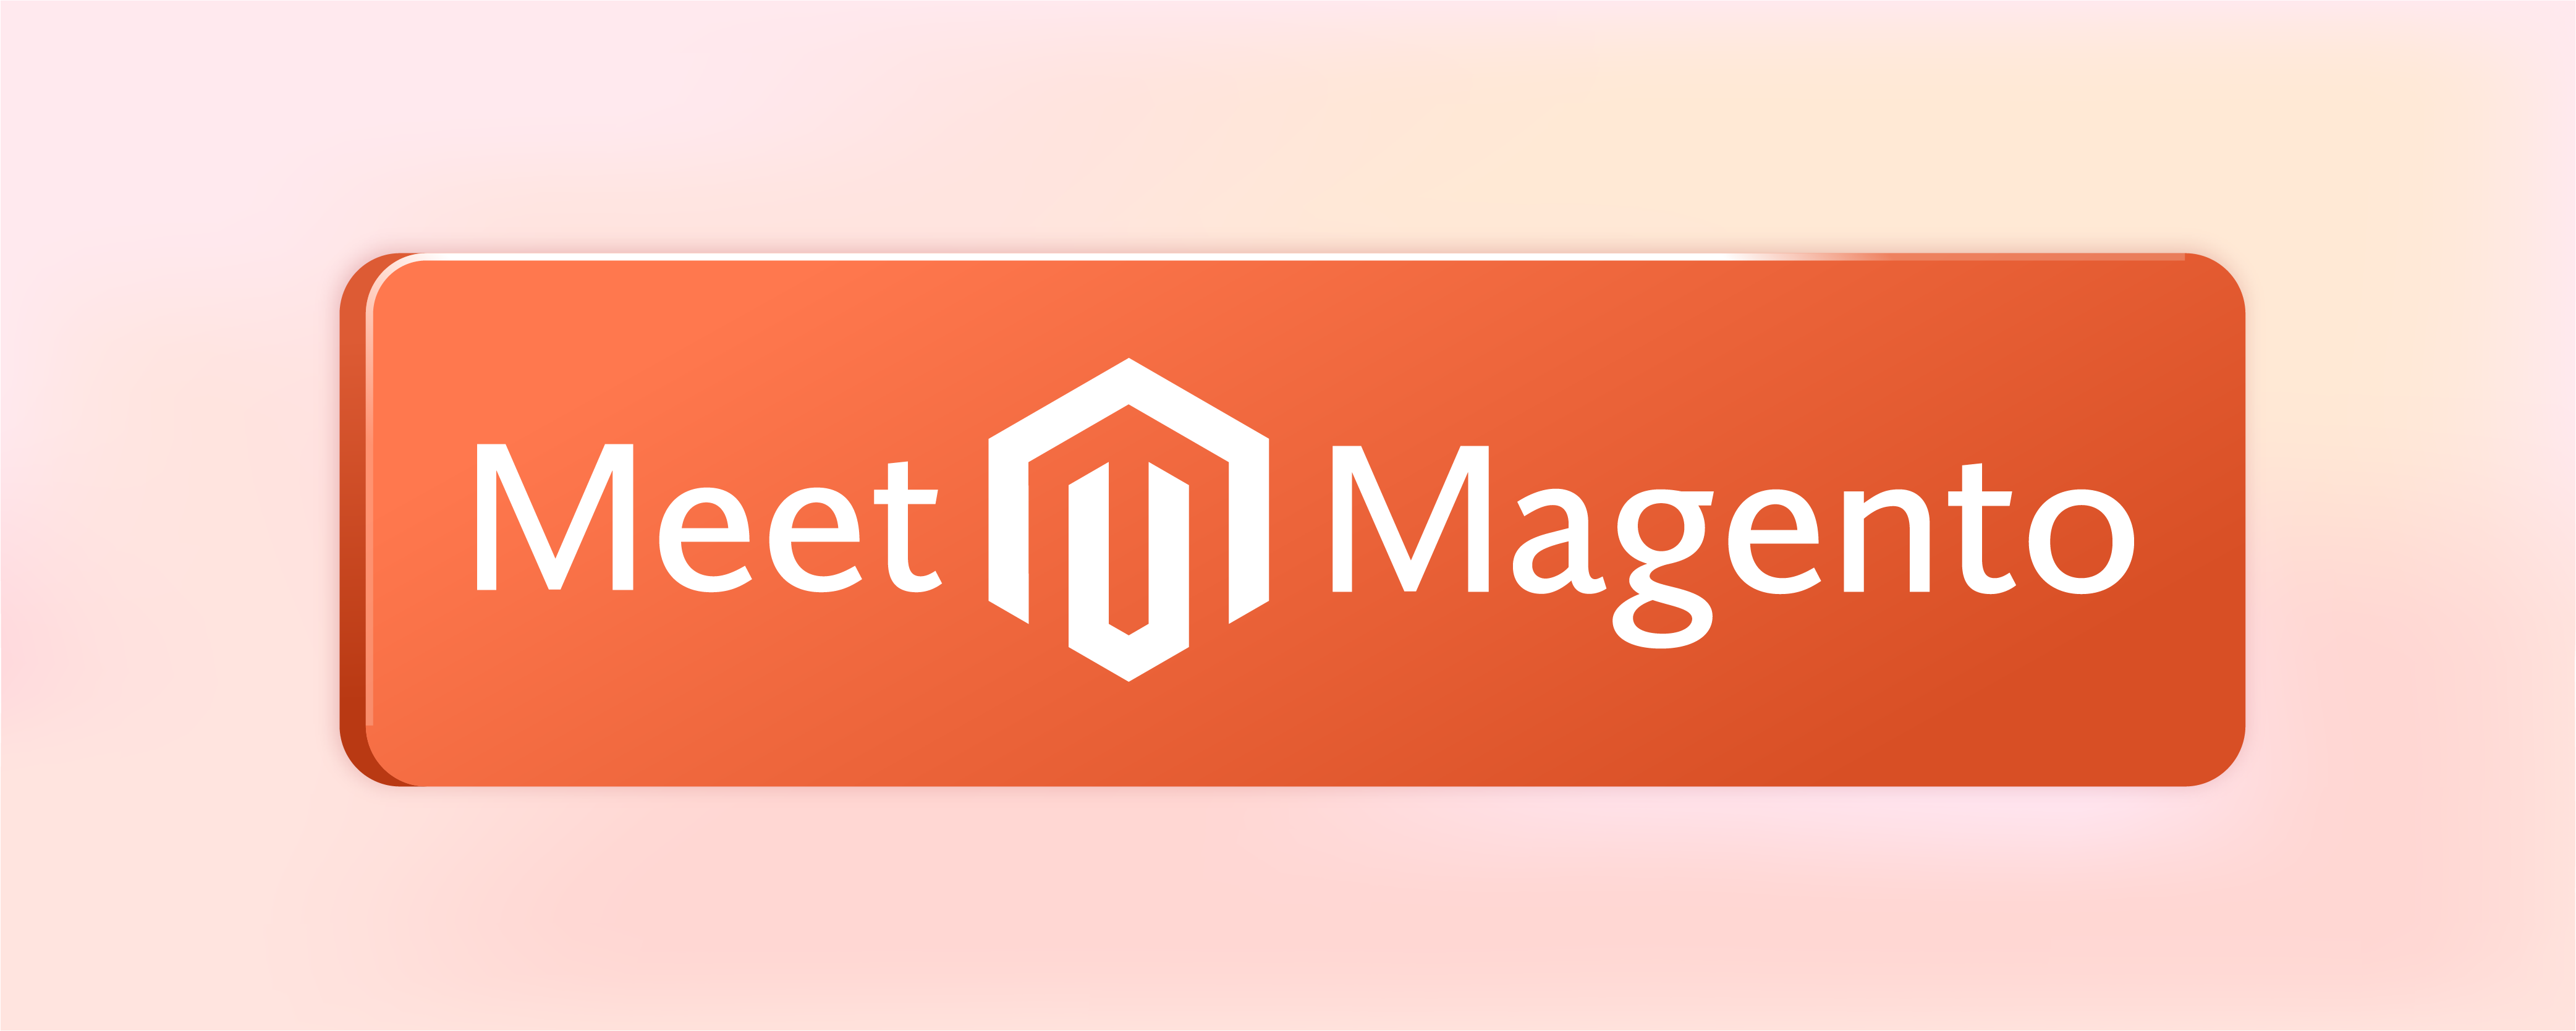 Exploring Ecommerce: Meet Magento Events and Conferences